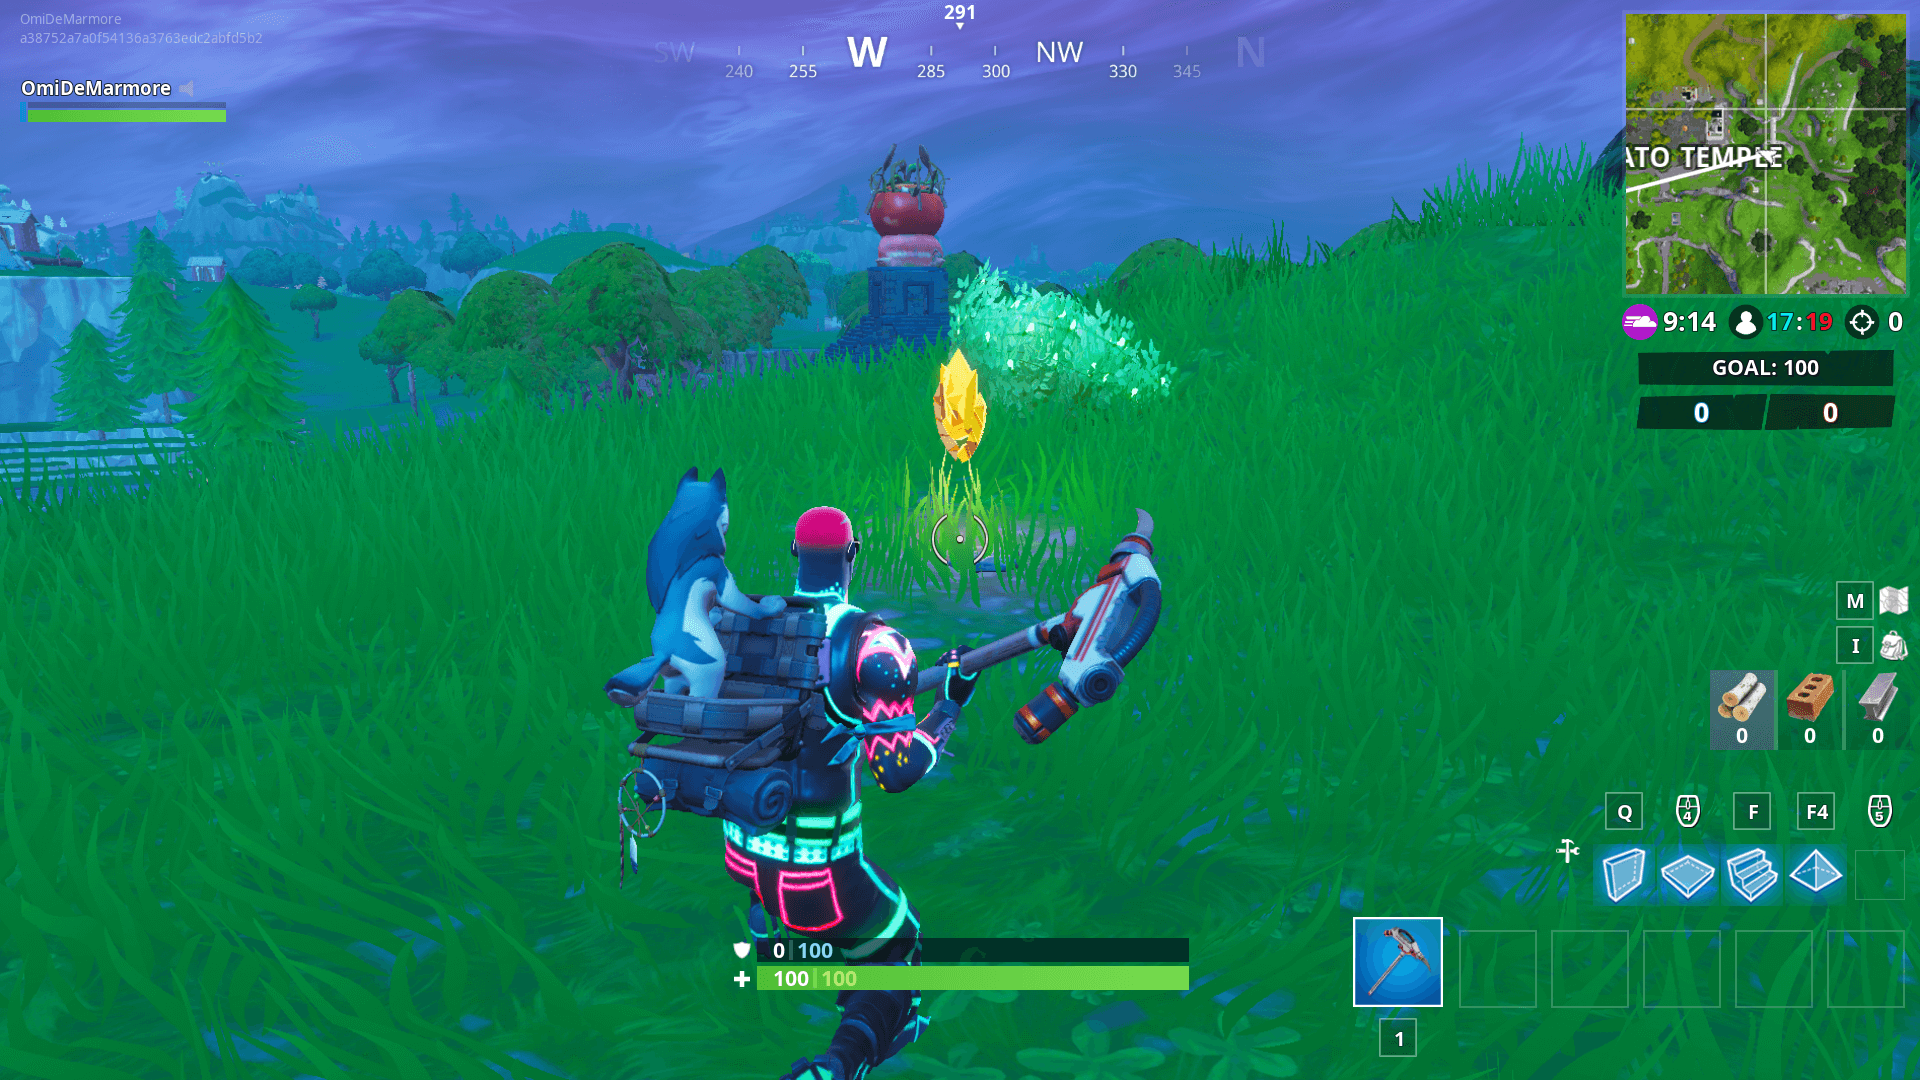 Fortnite Search Between Rock Man Tomato Fortnite Giant Rock Man Crowned Tomato And Encircled Tree Search Location Season 7 Dot Esports